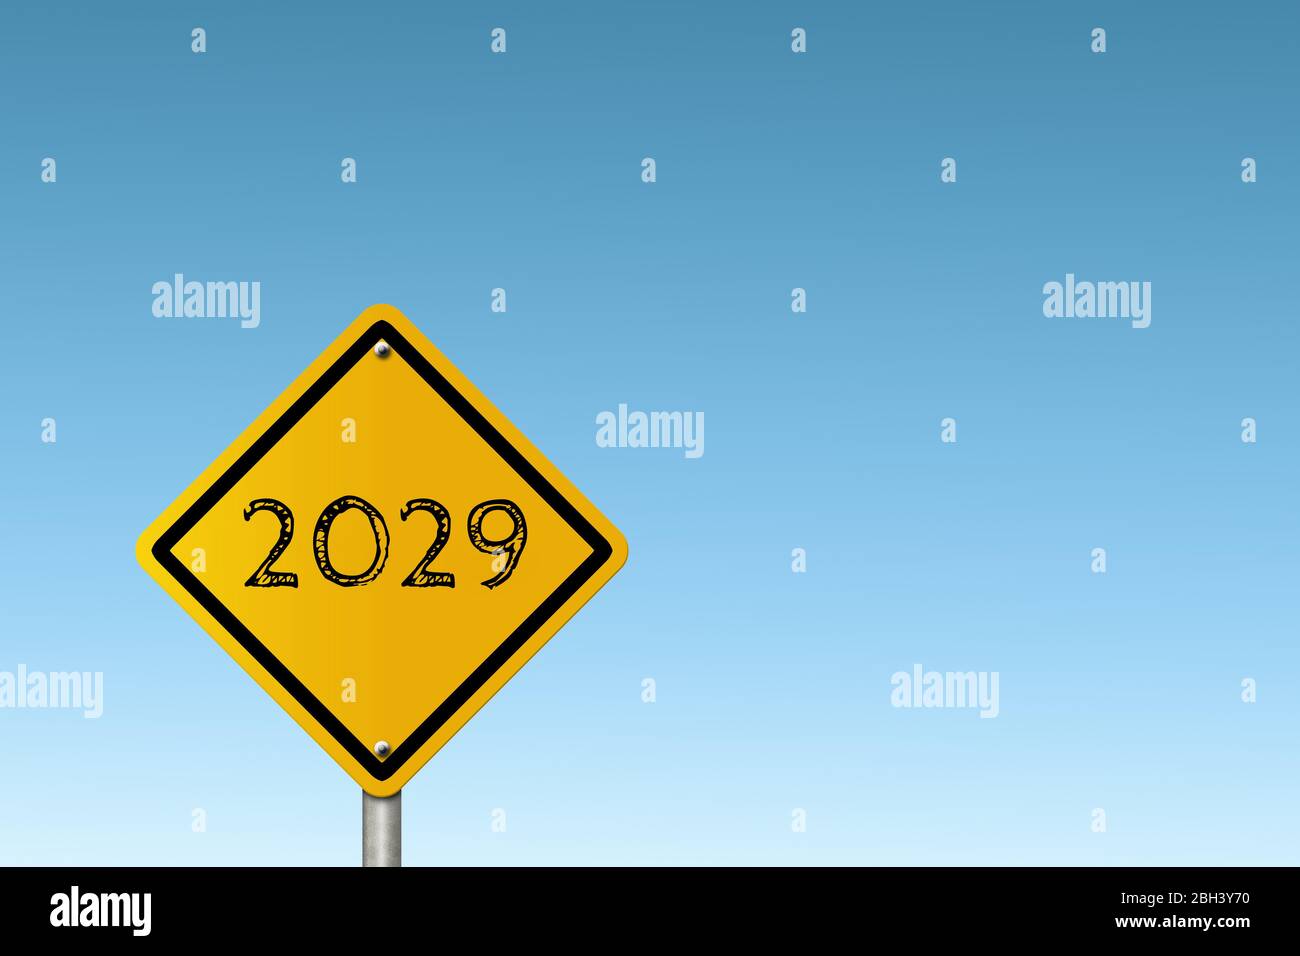 2029 New Year Concept Stock Photo